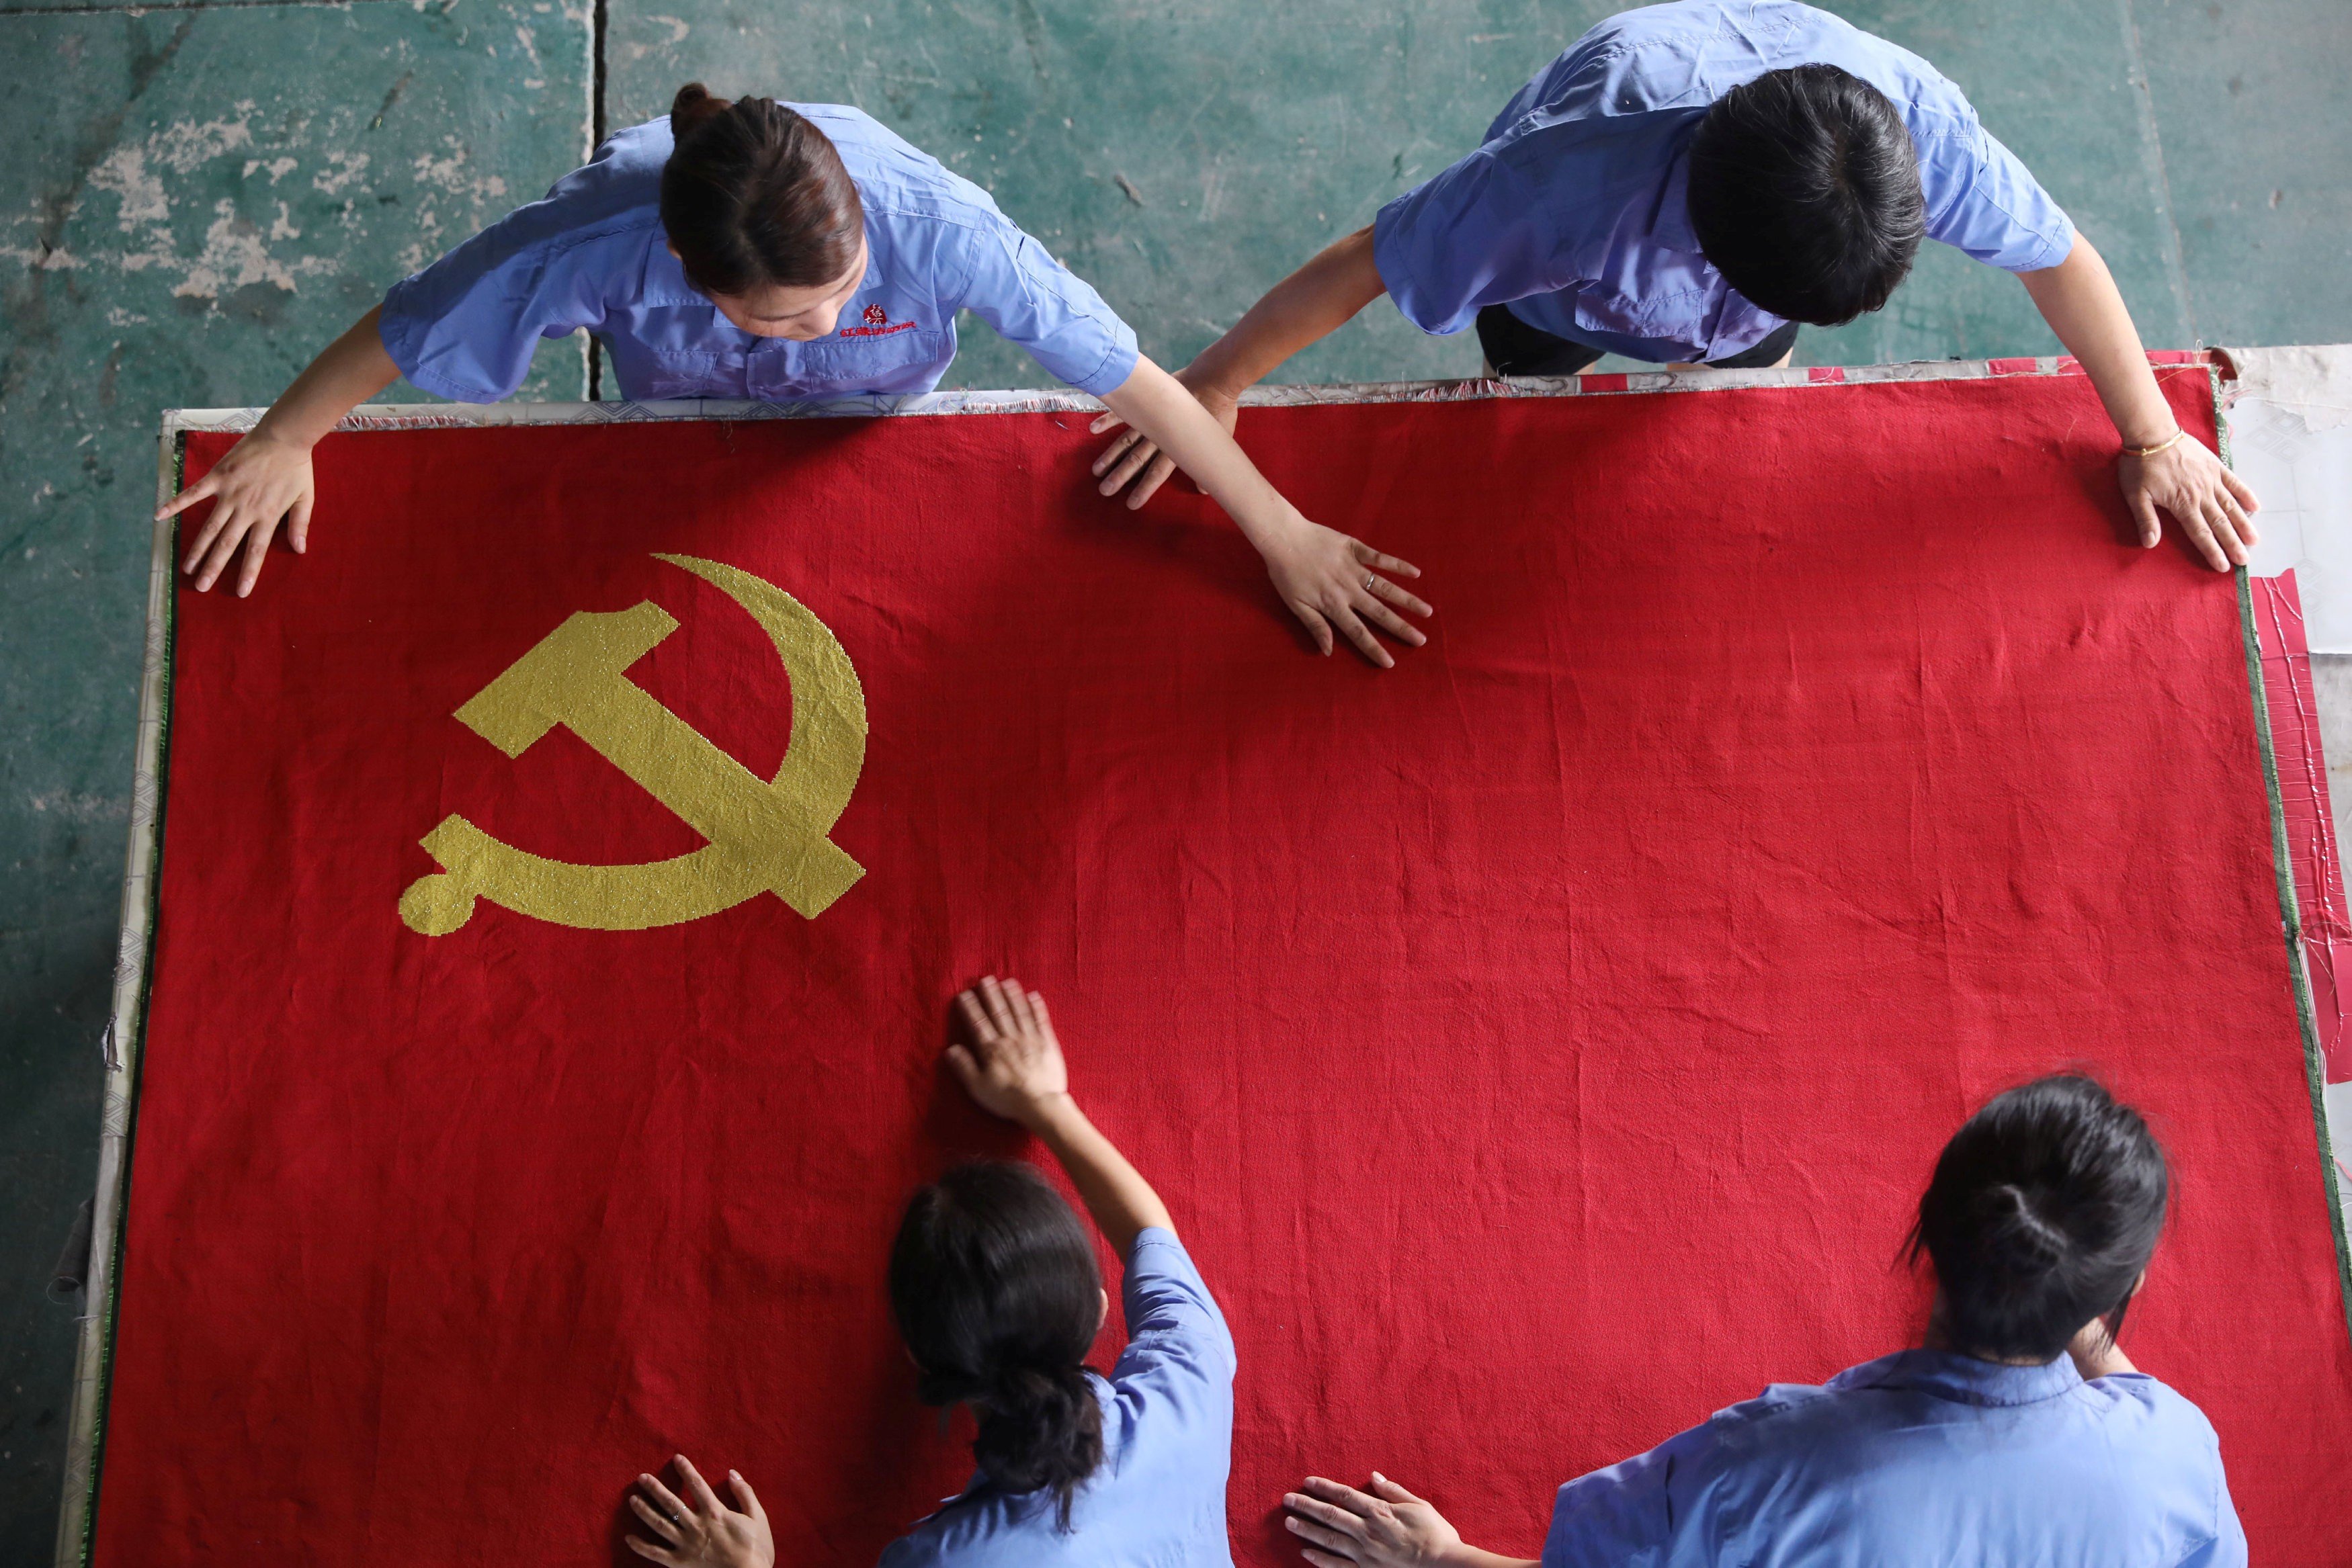 China has stoked its people’s hopes of using economic growth to return to national greatness and reverse national humiliation, and such dreams die hard. Photo: Reuters